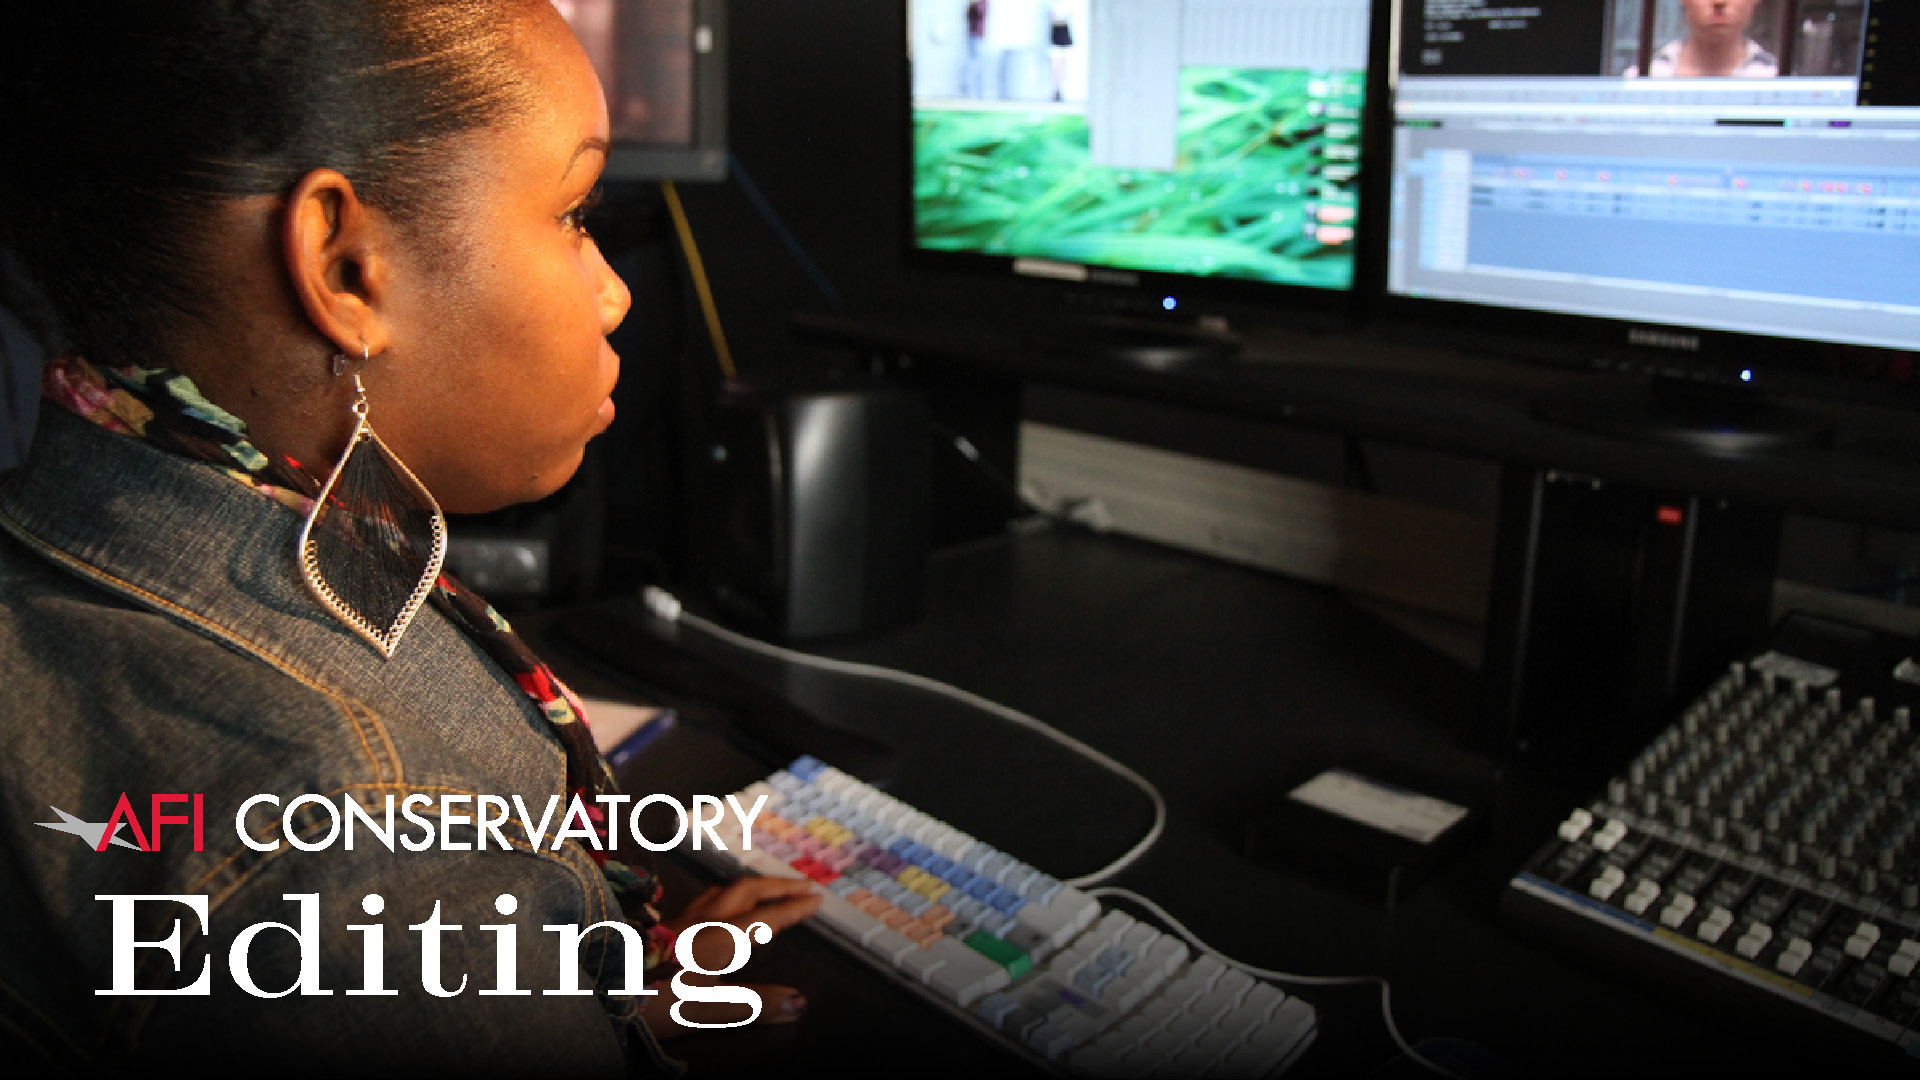 A female AFI Fellow at the AFI Conservatory editing a digital video project at one of the film school's editing stations featuring multiple monitors